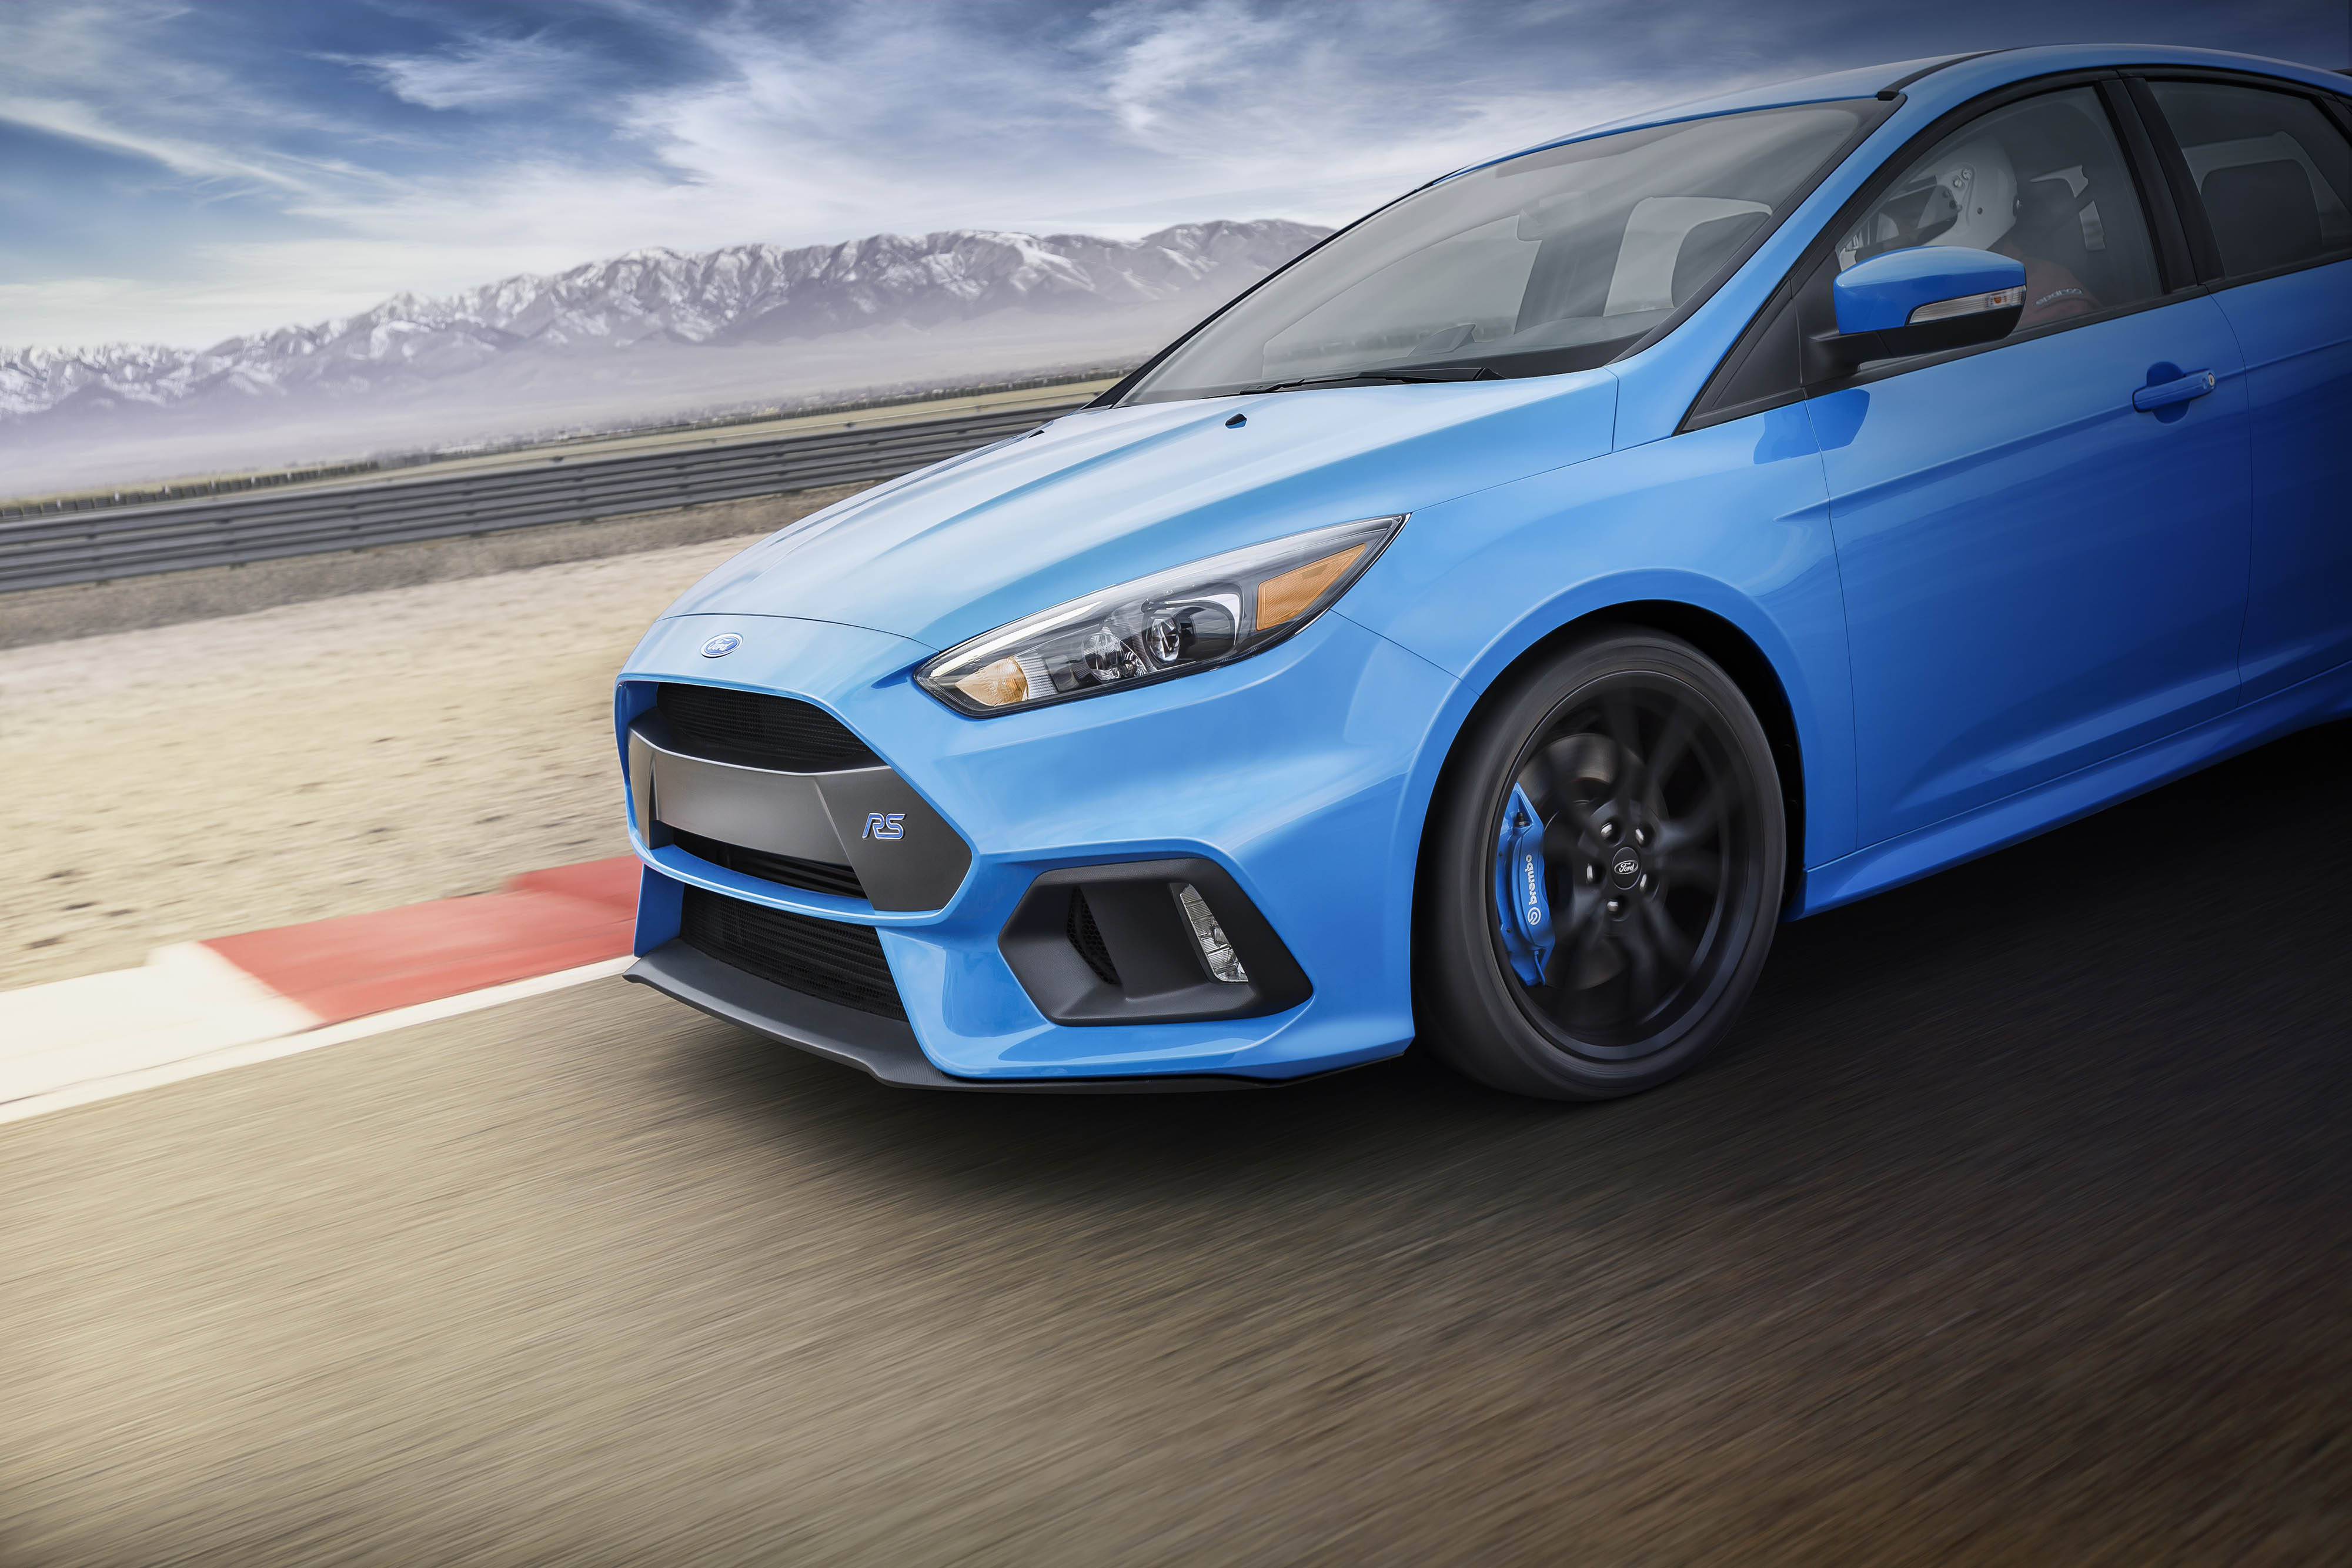 2017 Ford Focus RS Hatchback | The Legacy Continues | Ford.com